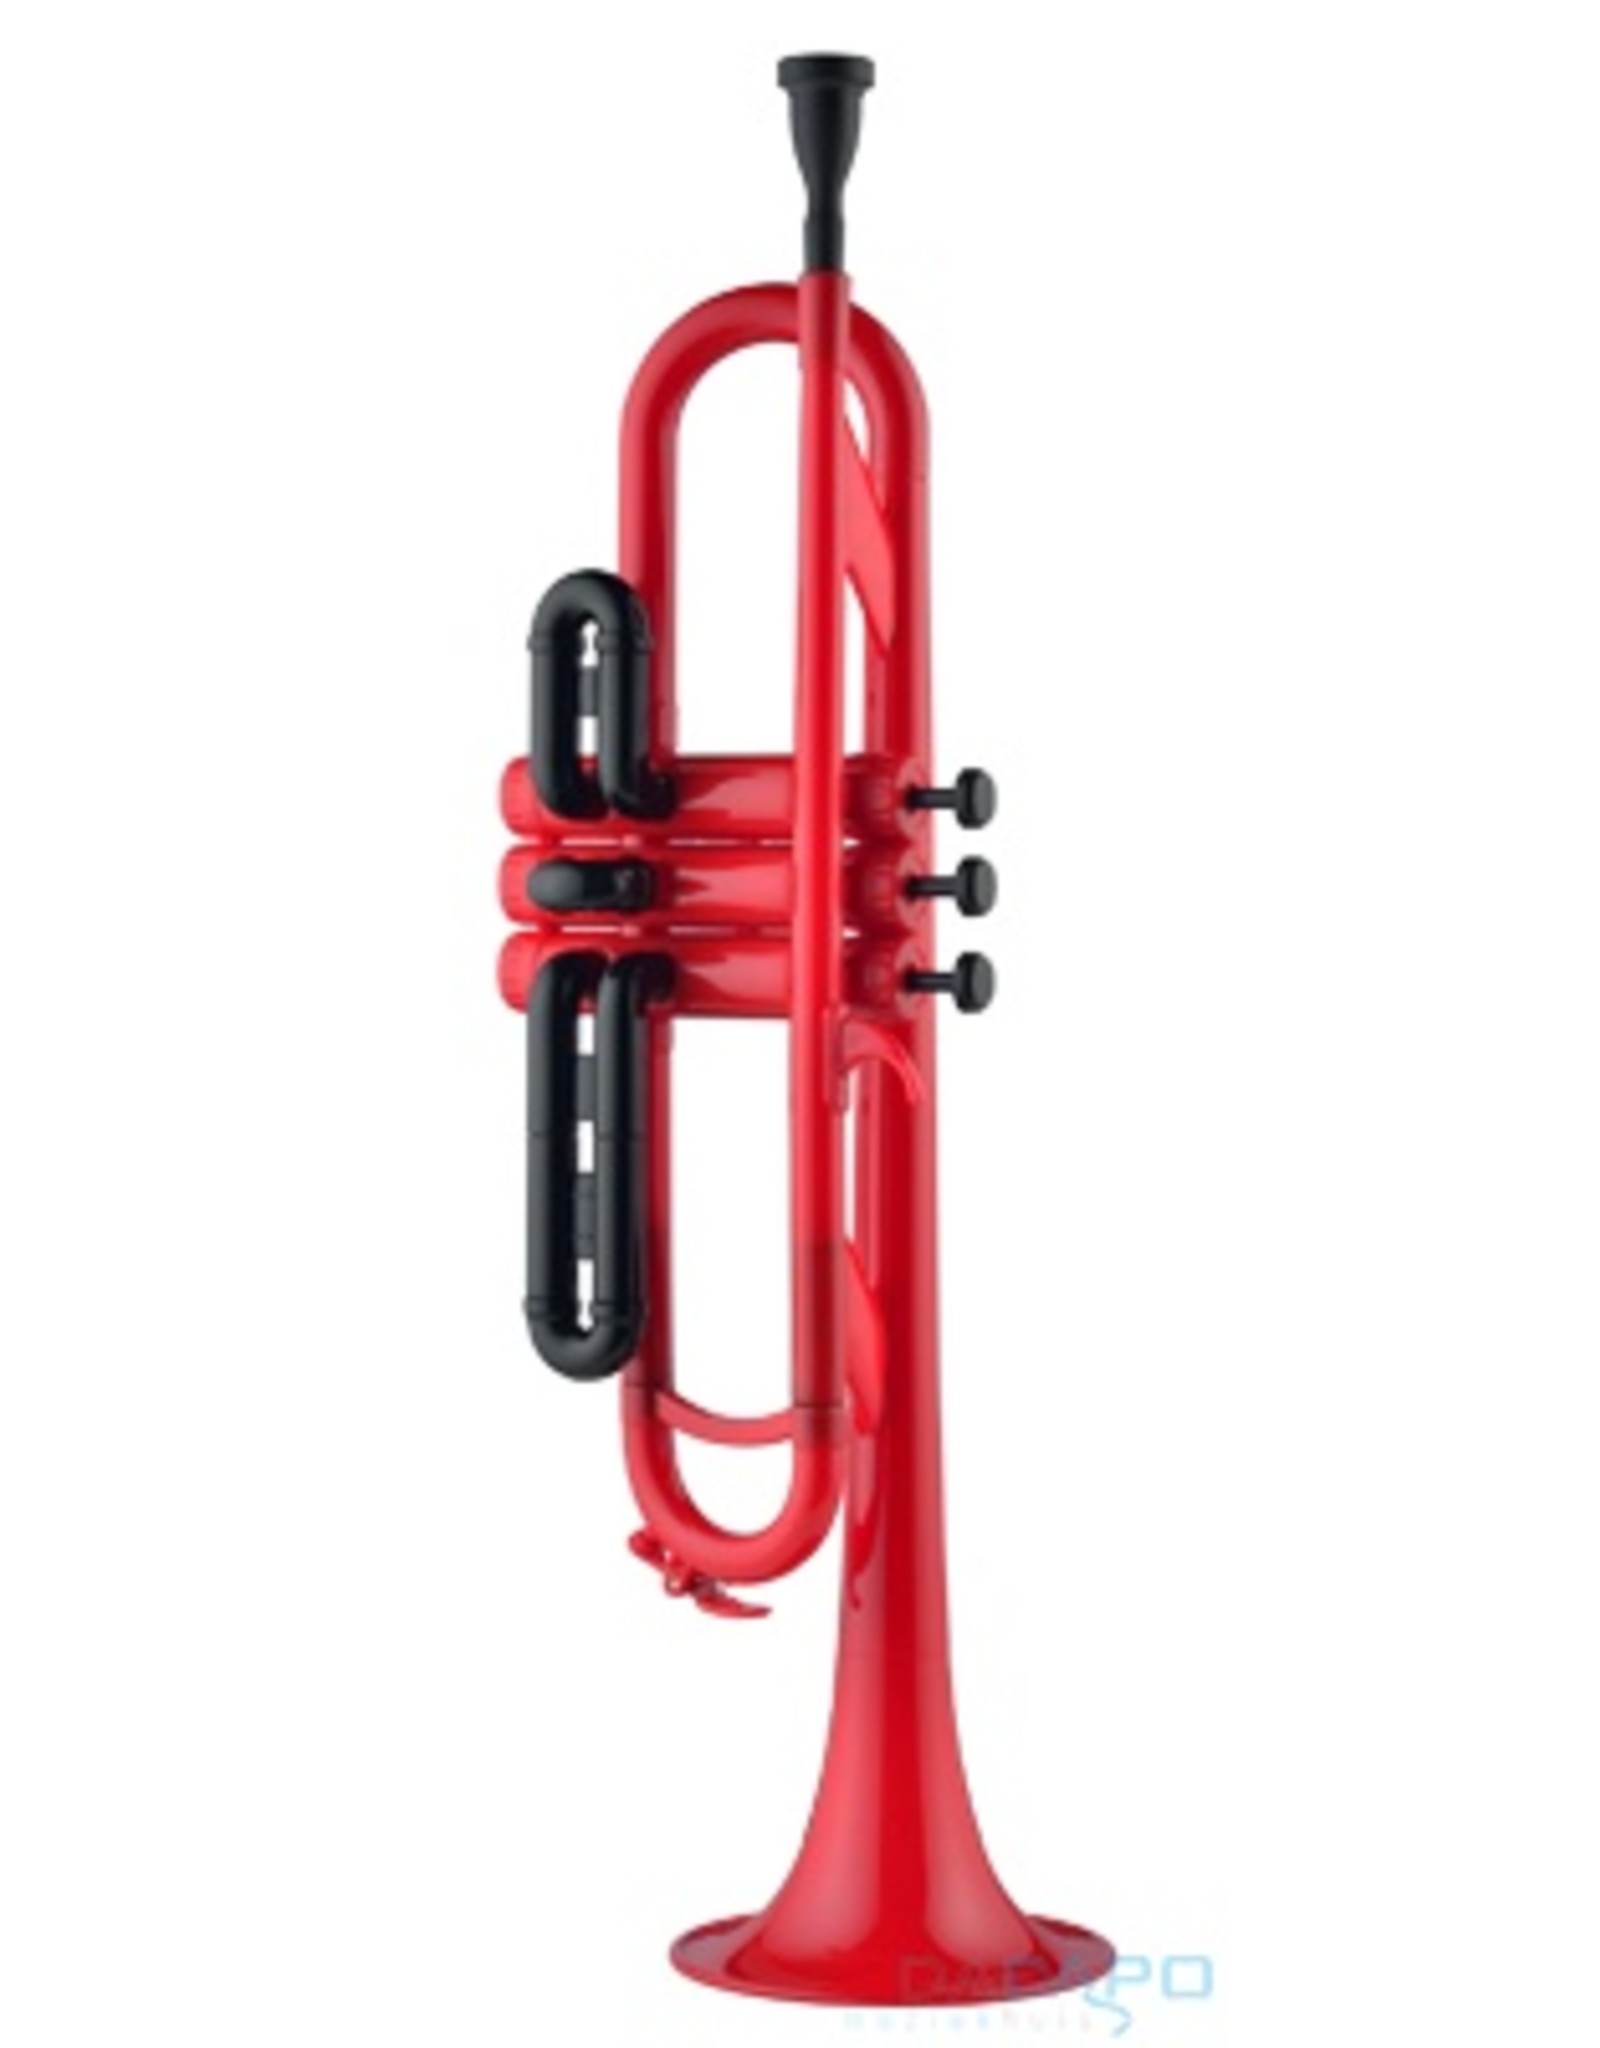 Coolwind Trumpet Berry Red